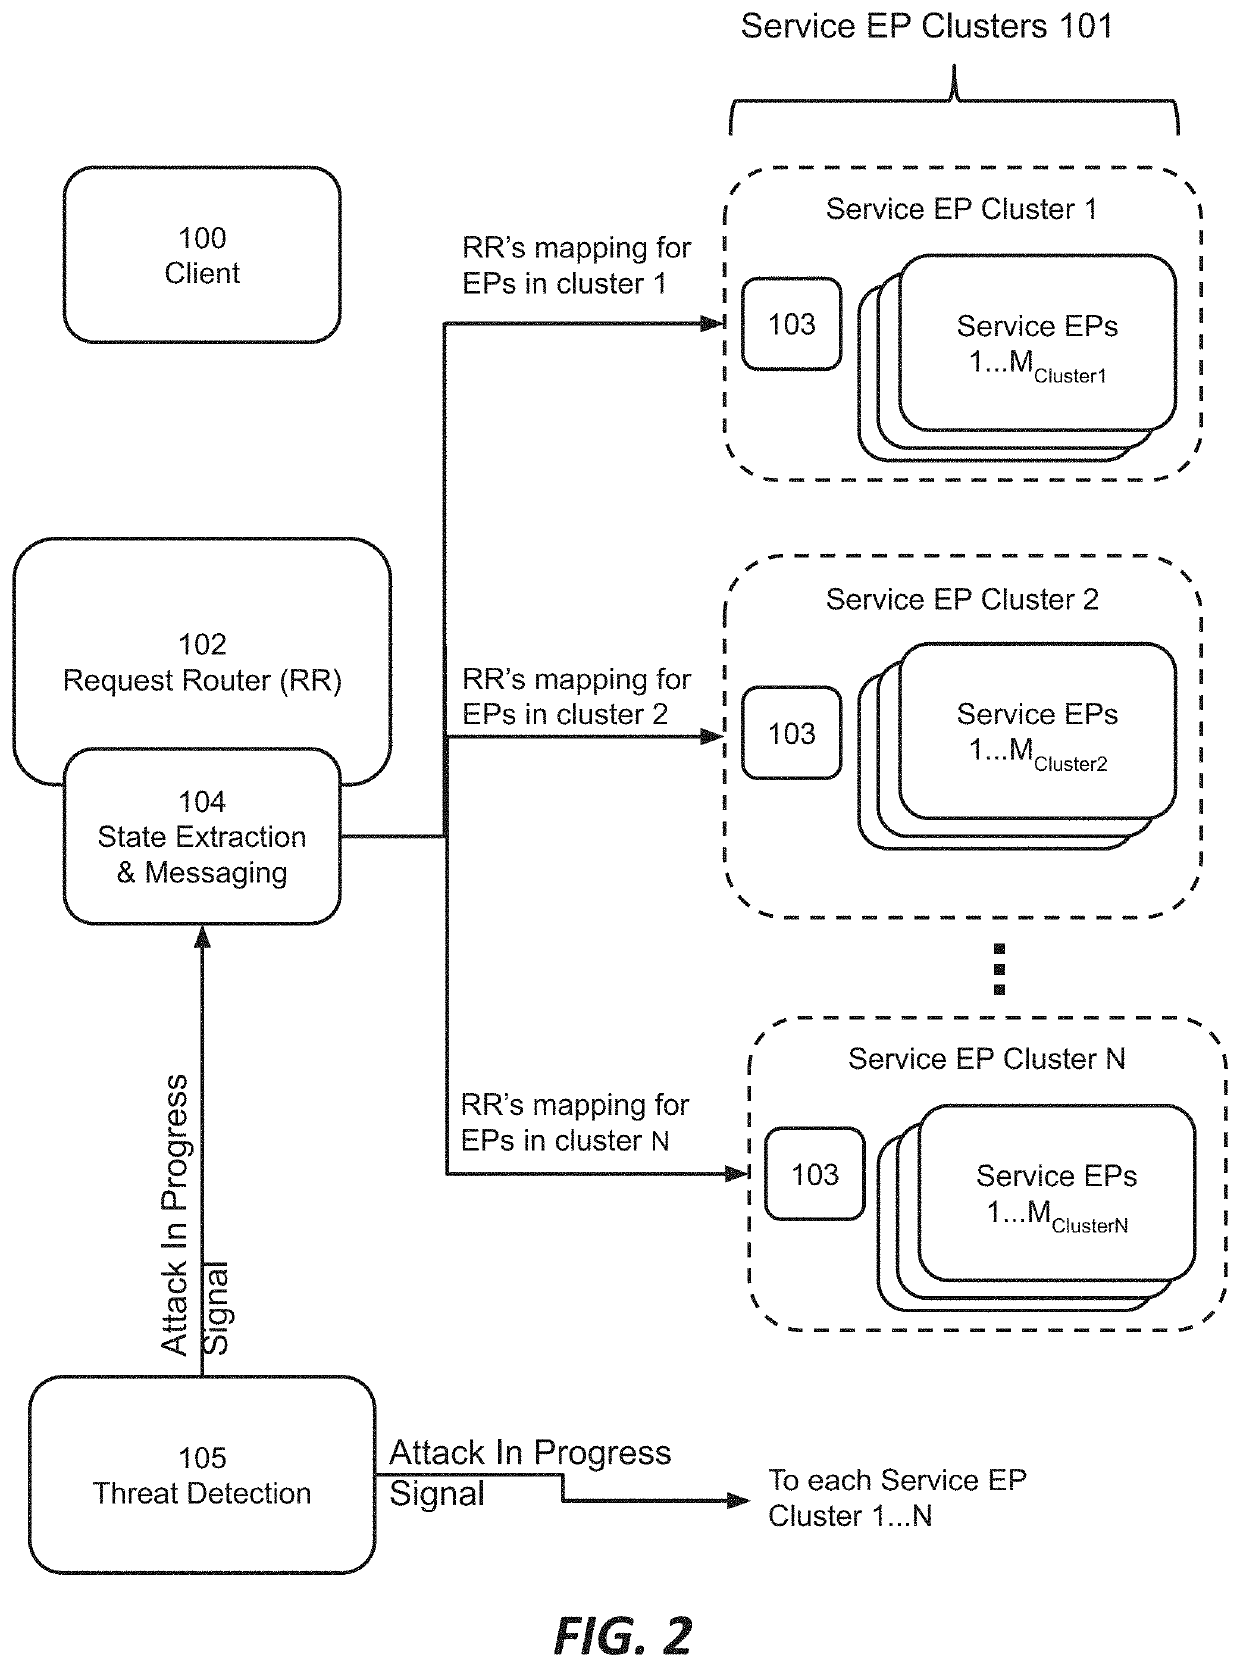 Using the state of a request routing mechanism to inform attack detection and mitigation